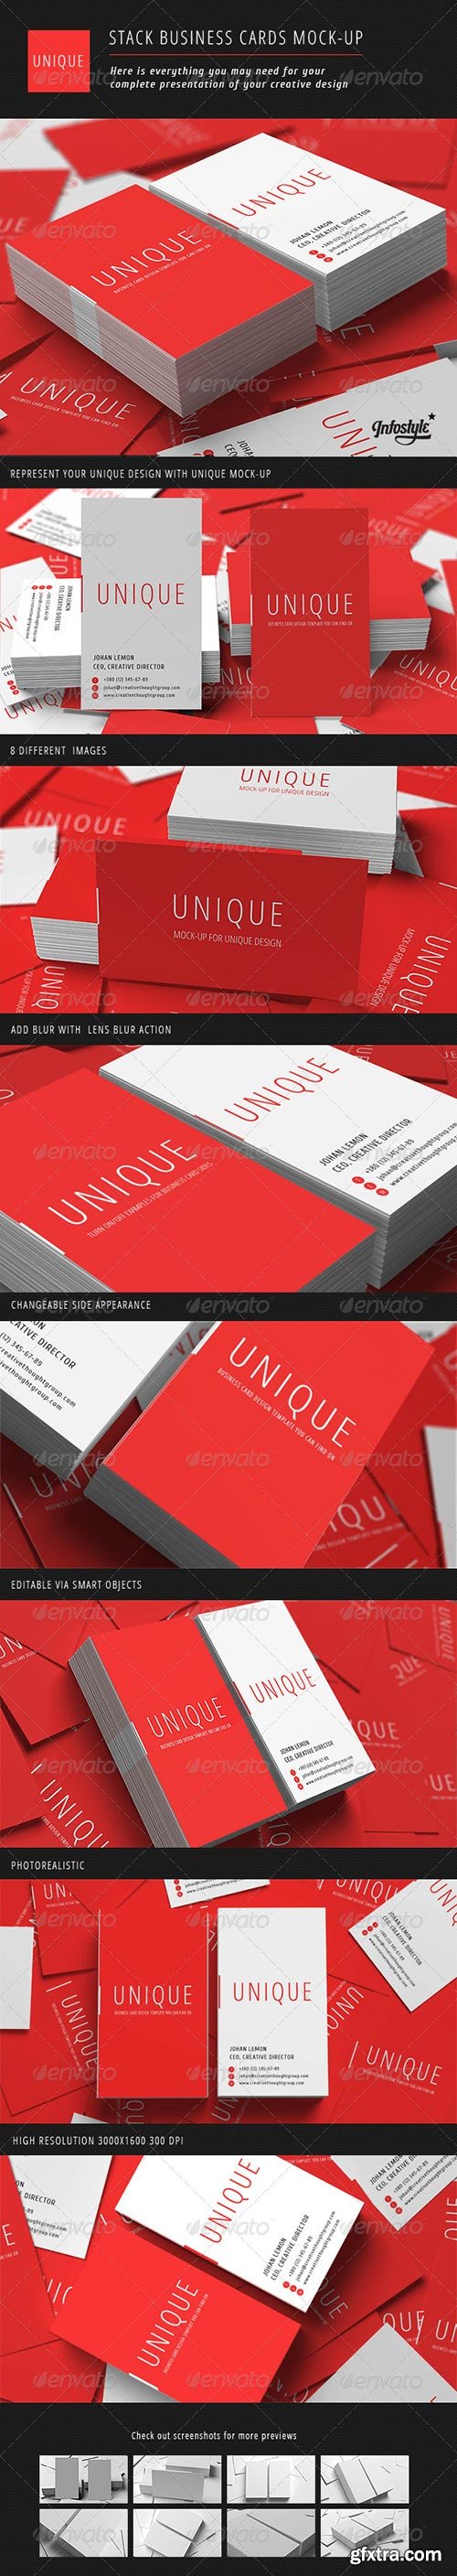 GraphicRiver - Stack Business Cards Mock-Up